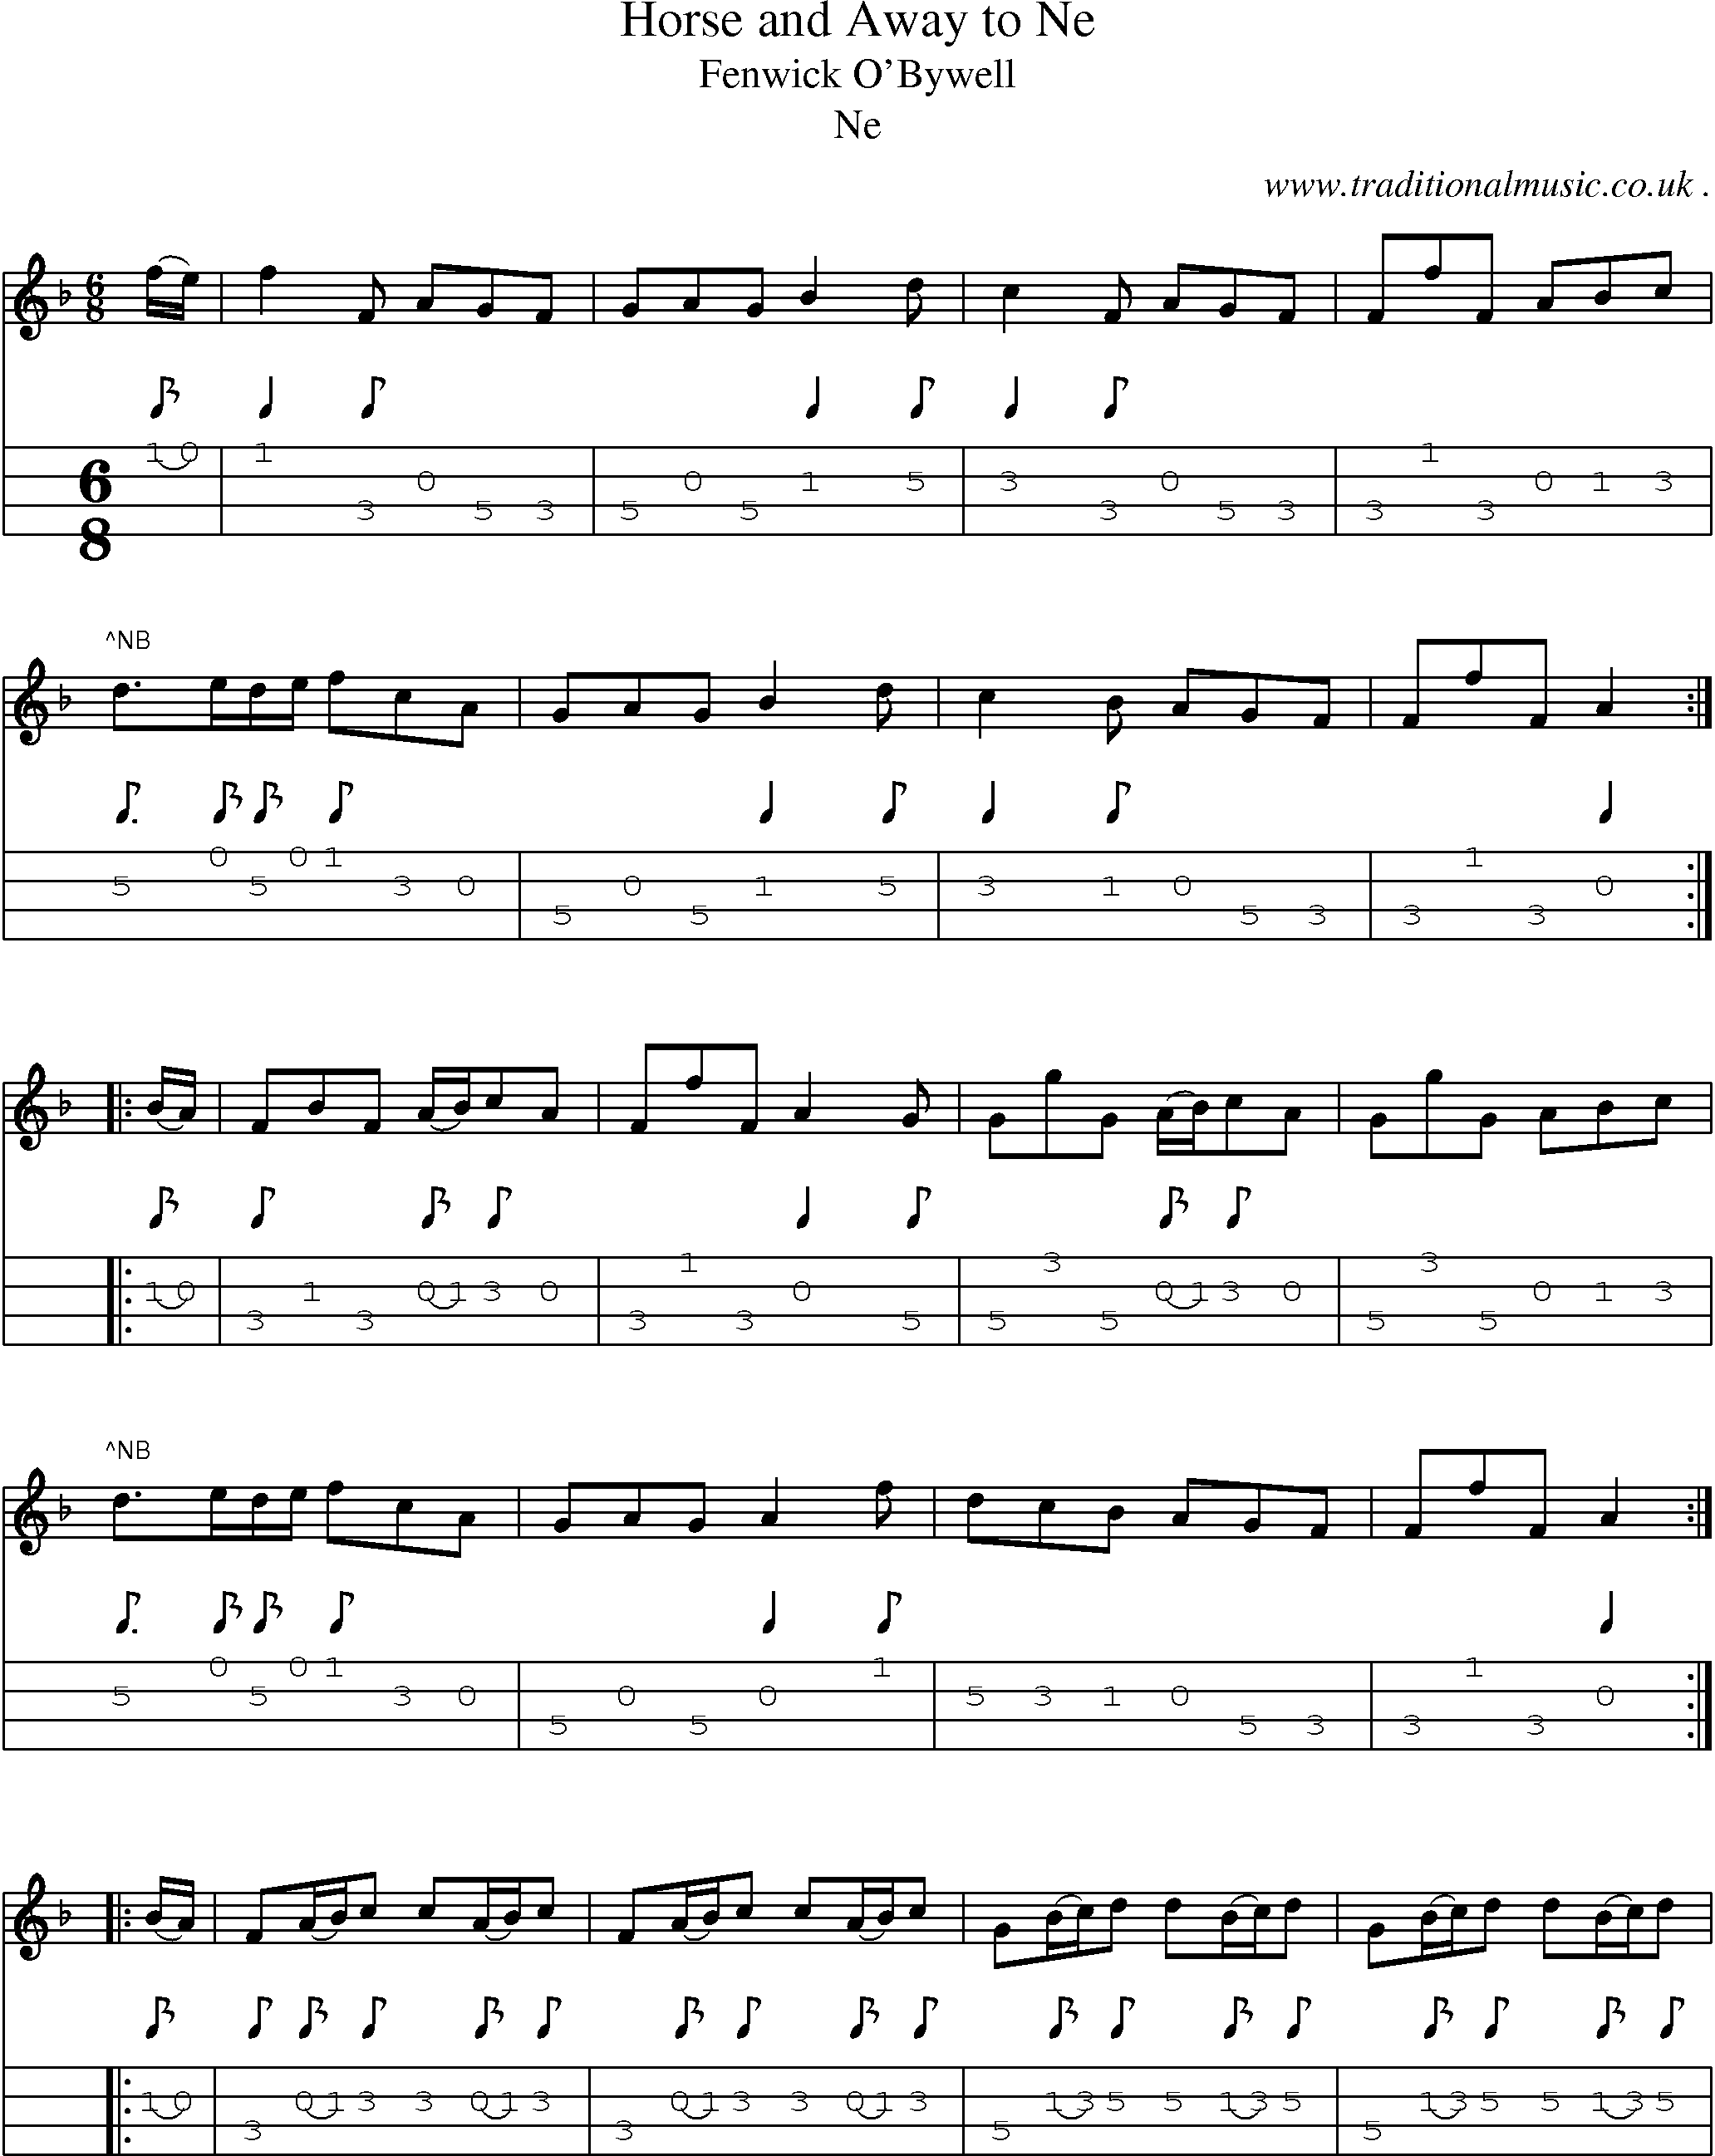 Sheet-Music and Mandolin Tabs for Horse And Away To Ne